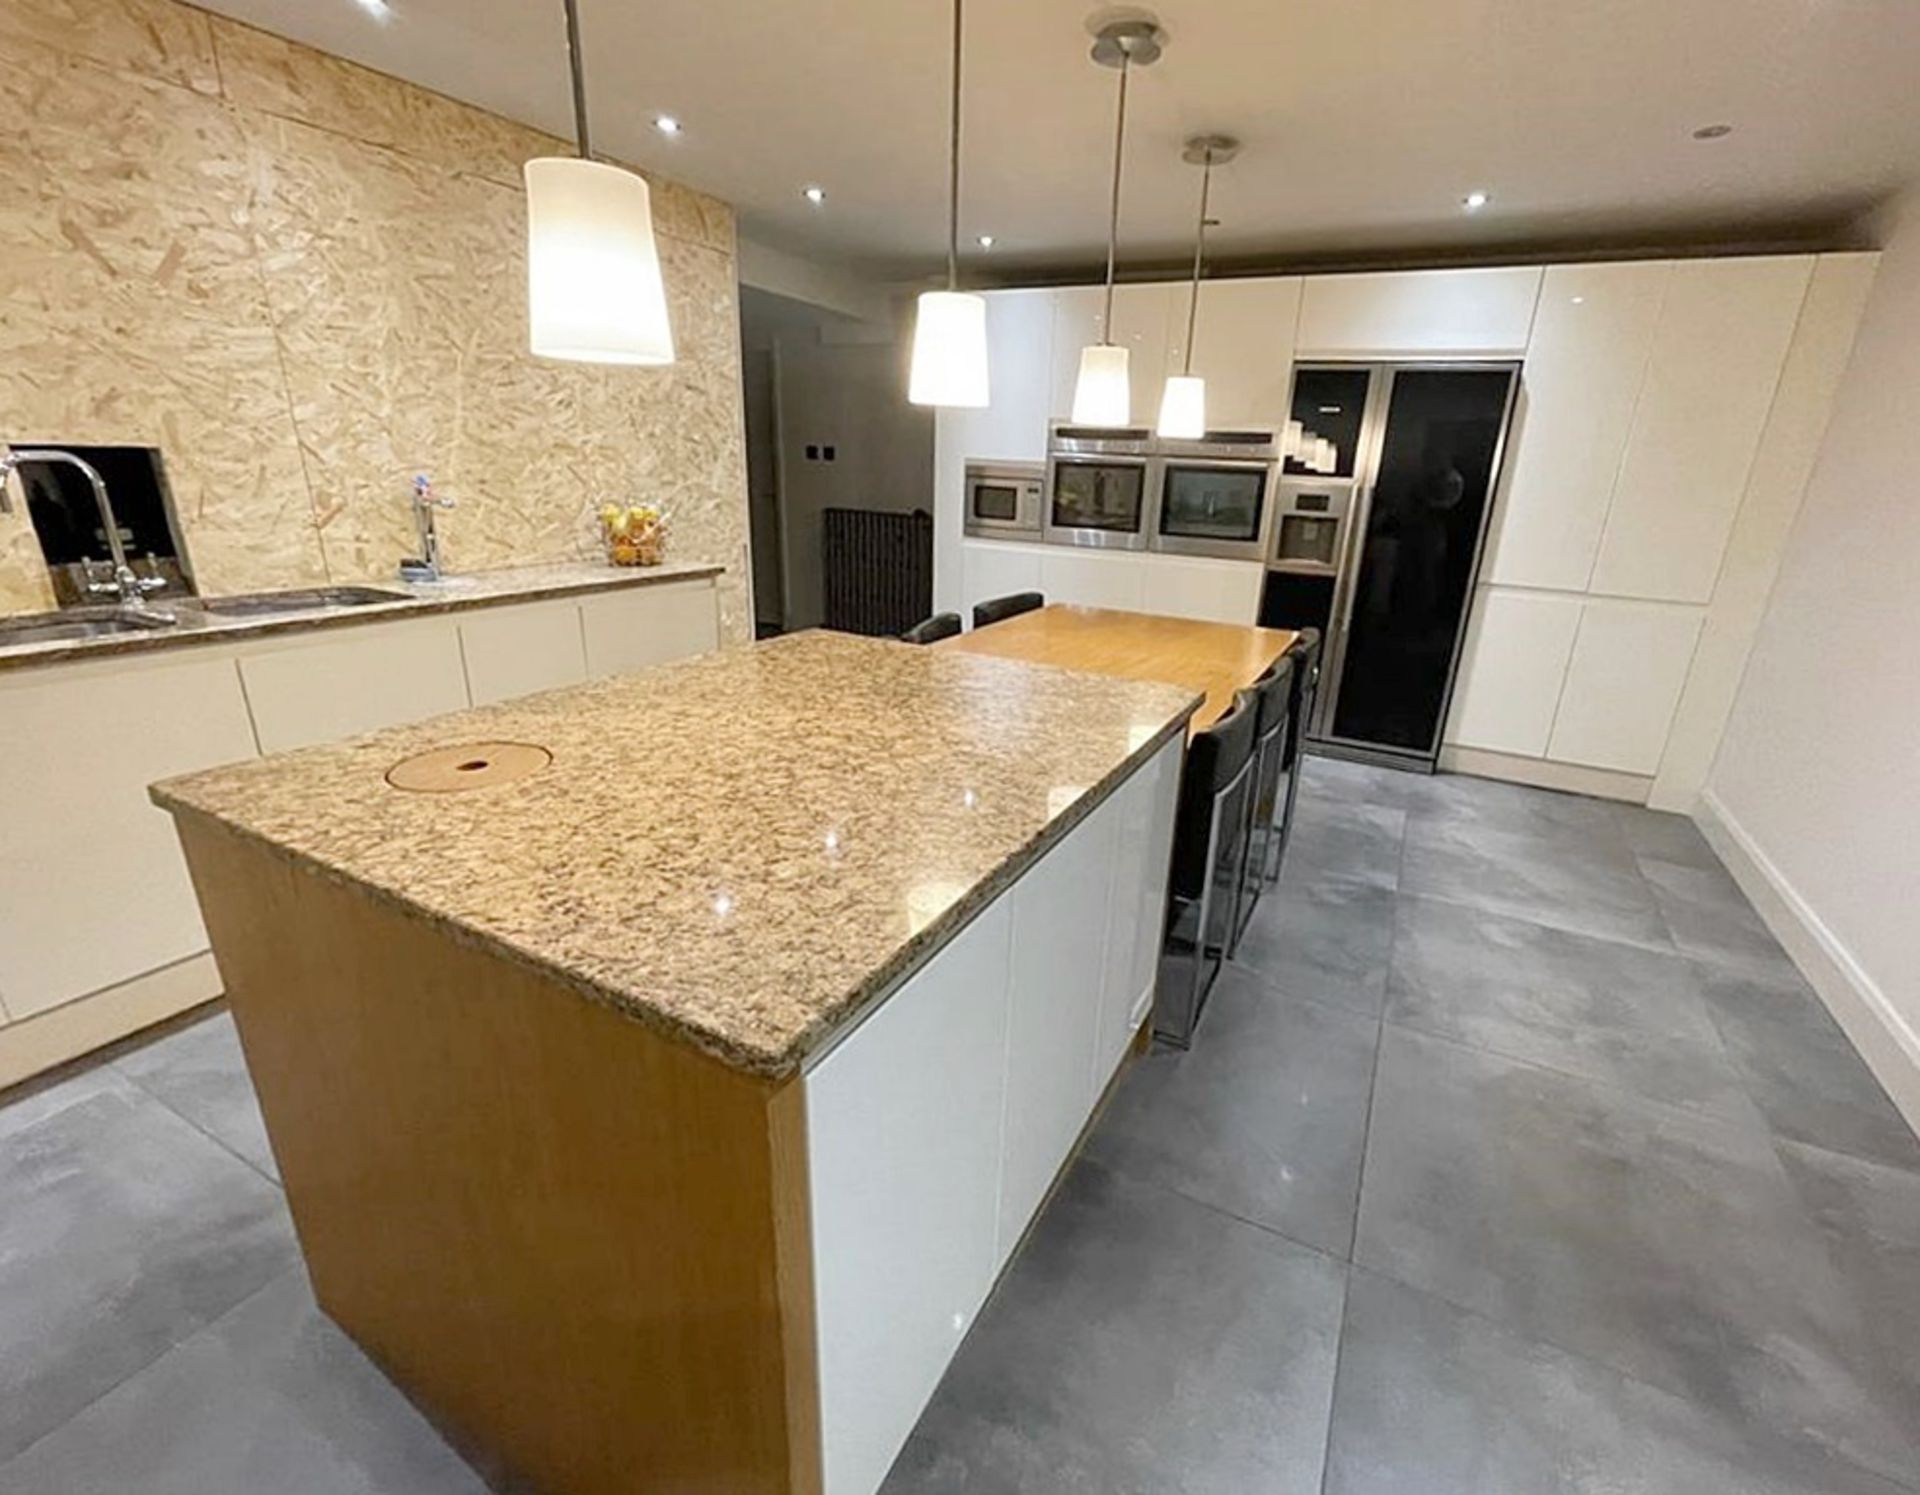 1 x Stunning PARAPAN Handleless Fitted Kitchen with Neff Appliances, Granite Worktops & Island - Image 2 of 126